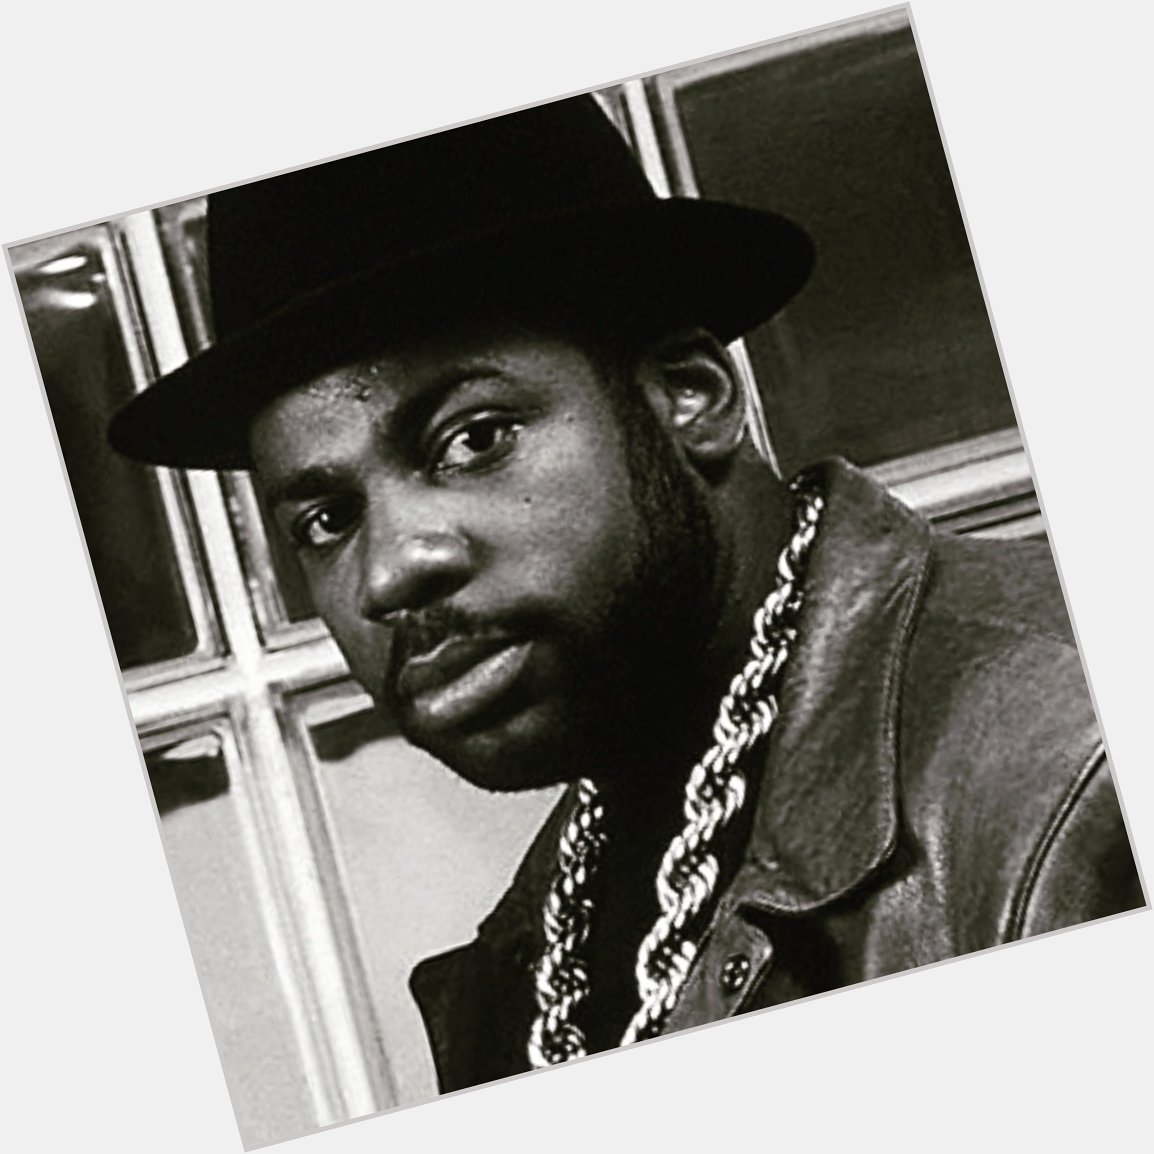 Happy birthday to Jam Master Jay on what would have been his 52nd birthday.   